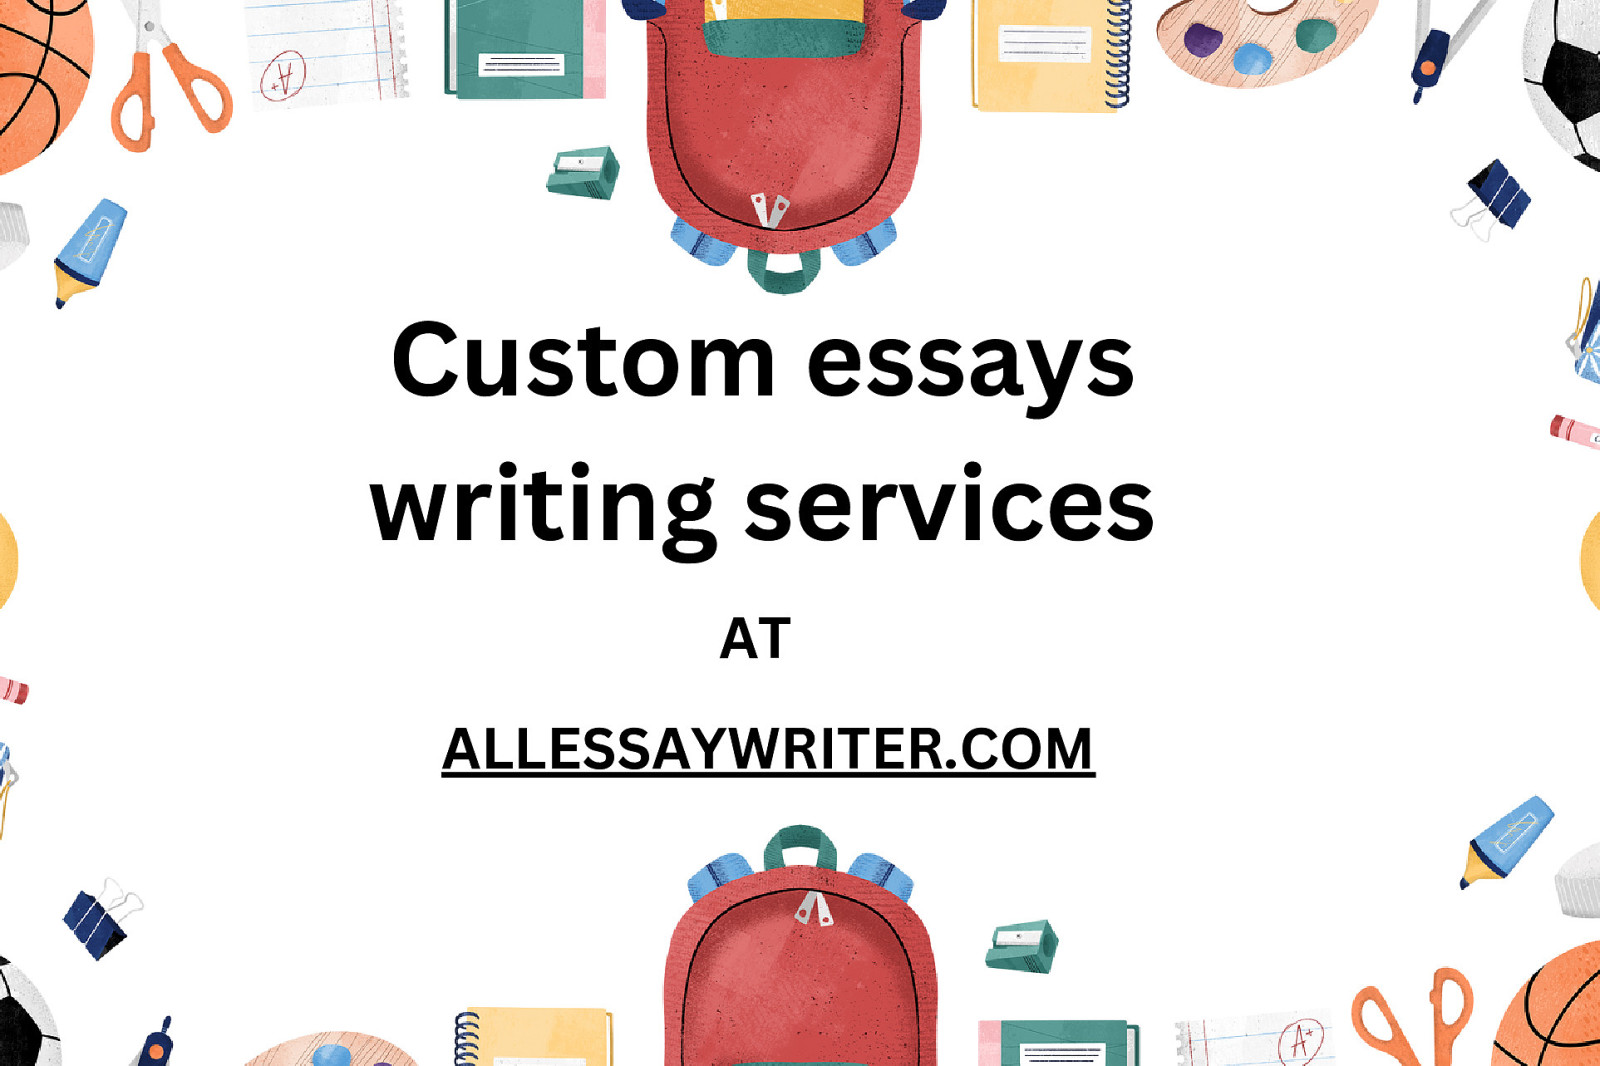 custom essays writing services: Your Key to Academic Success